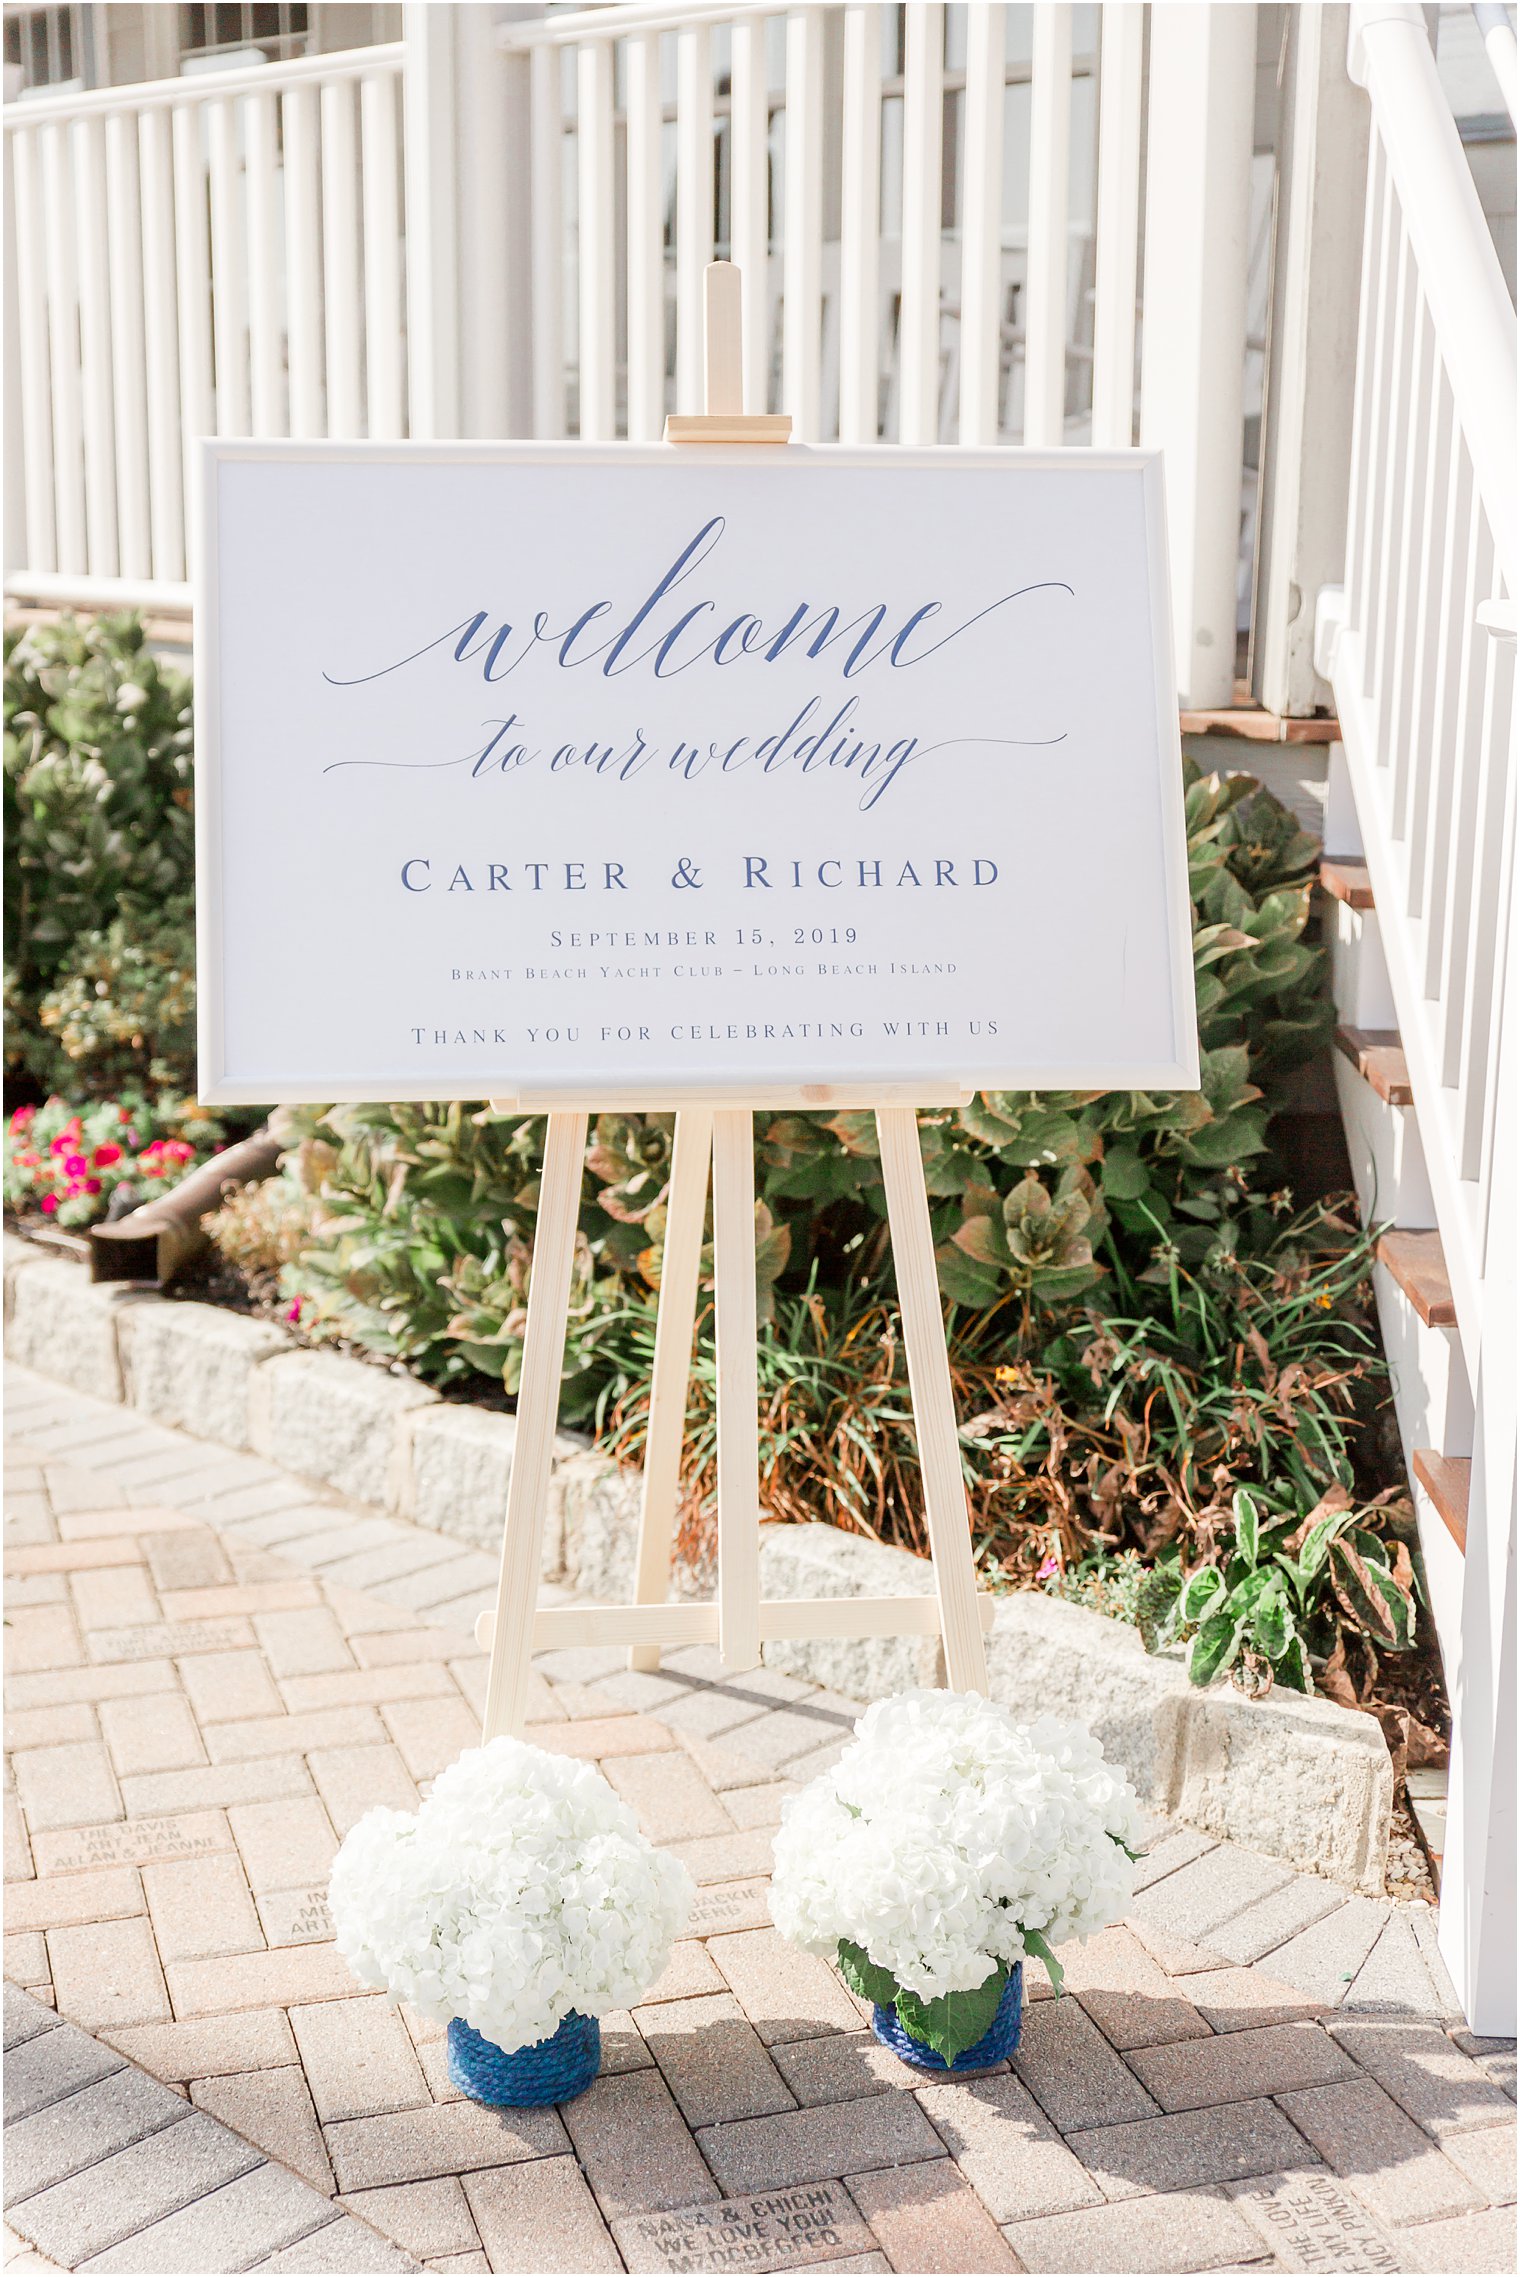 Floral arch at Brant Beach Yacht Club | Florals by Lily in the Valley | Arch by Rustic Drift